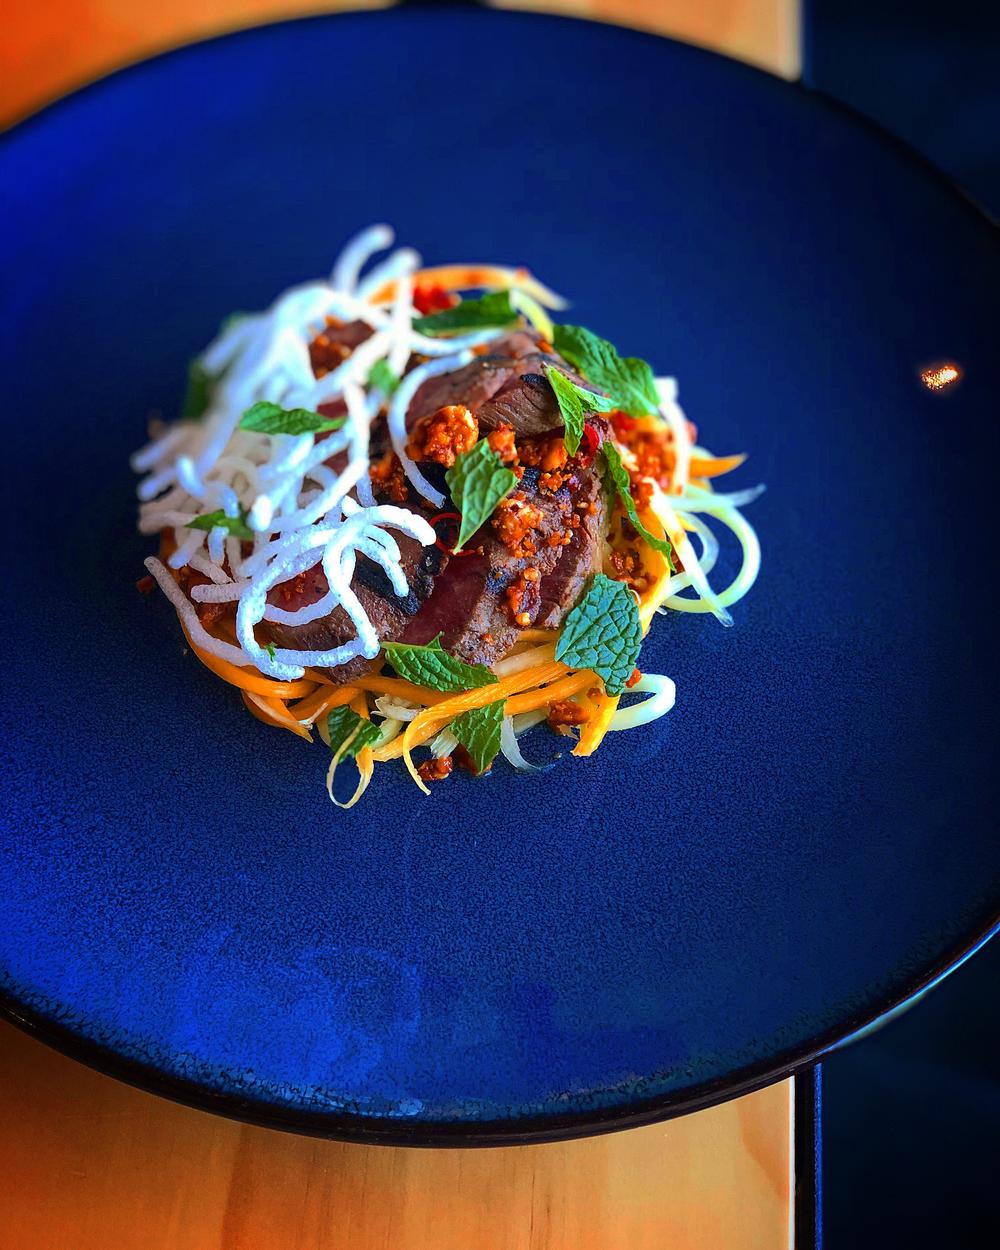 Chef Nolan Wynn's savory peanut brittle gives a sweet, salty and spicy topping to a papaya salad now available on Banshee's menu.